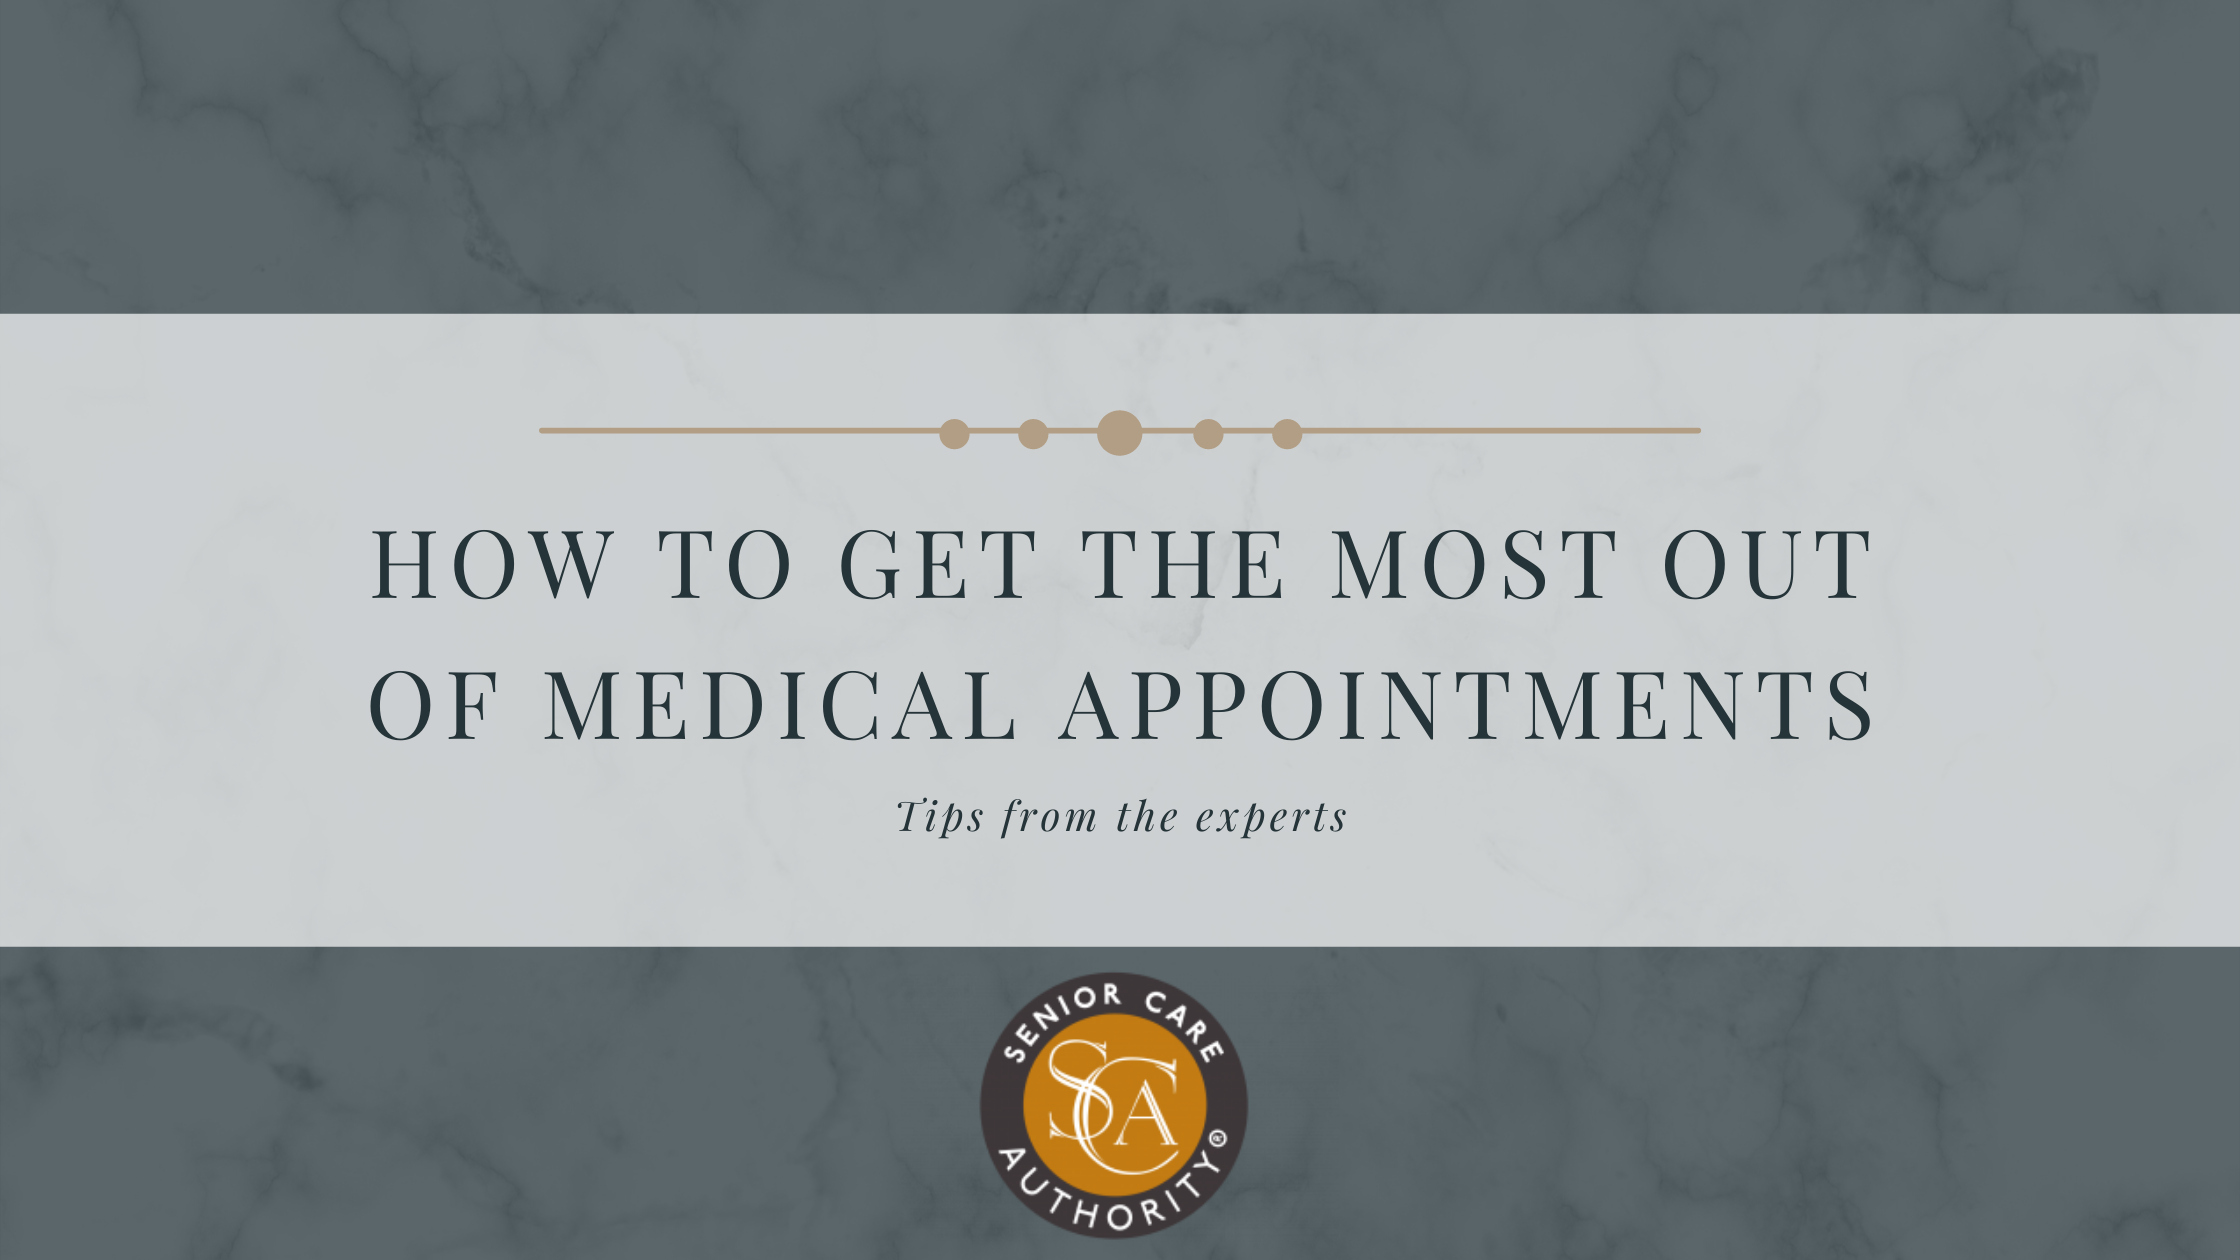 How To Get The Most Out of Medical Appointments- Tips from the experts